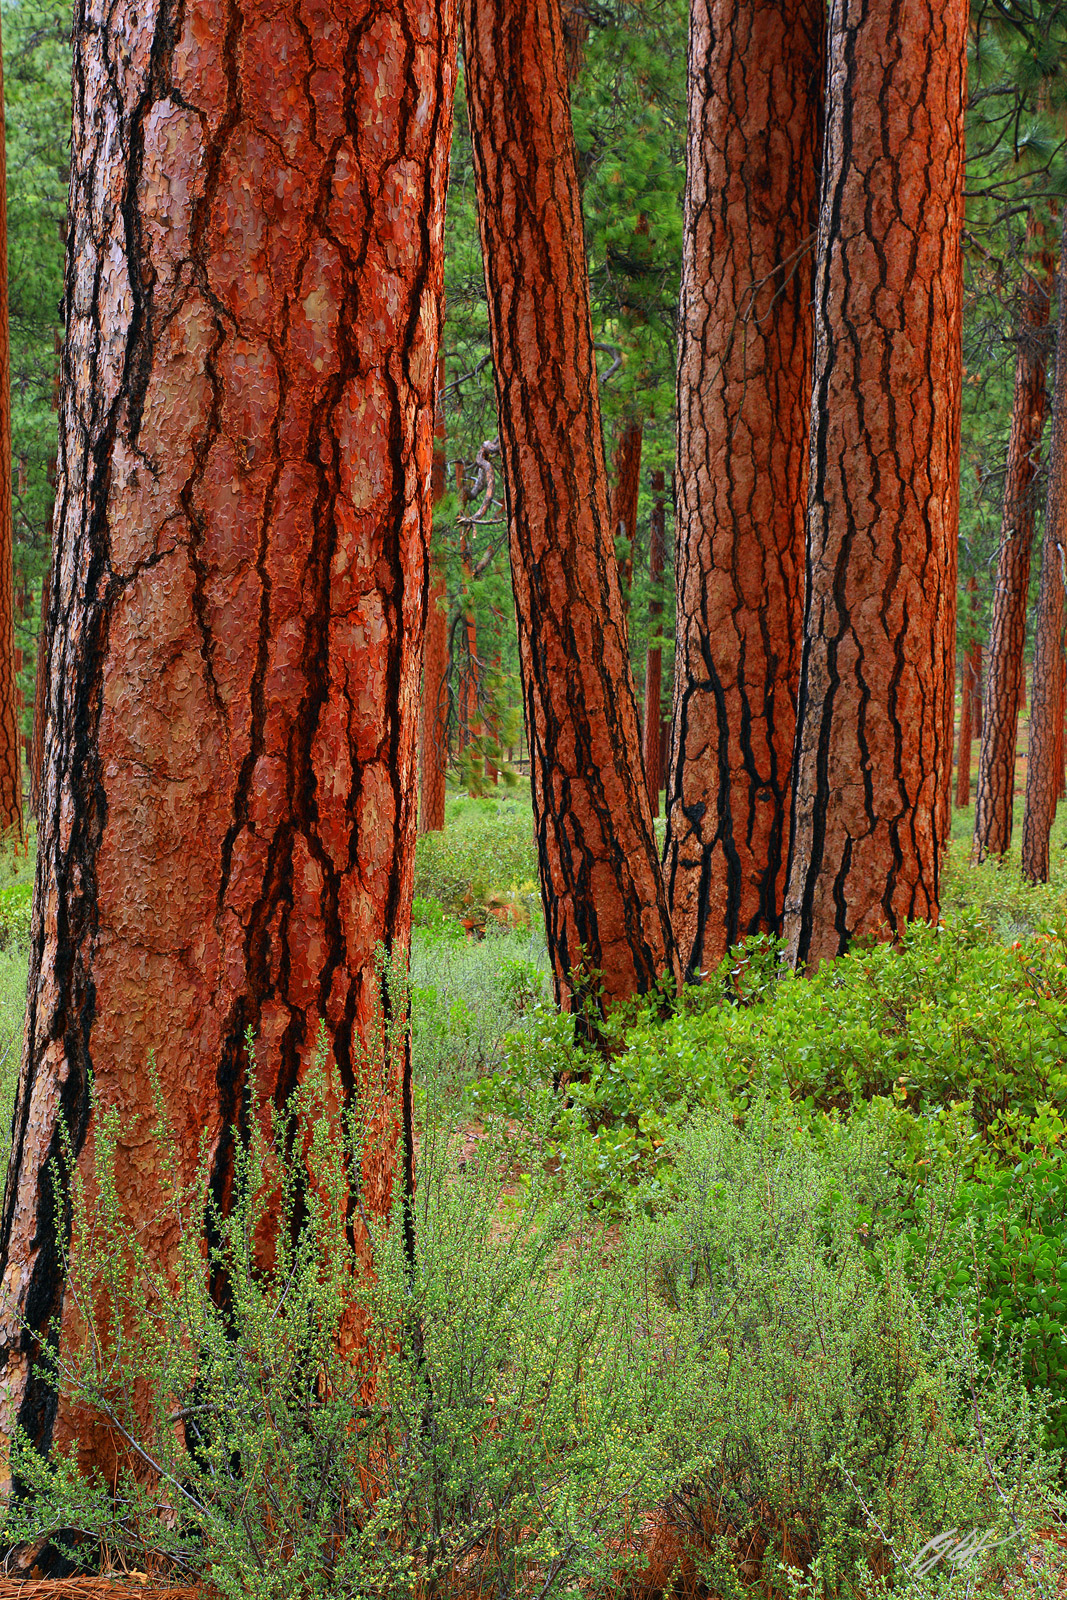 Pondarosa Pines, in the Willamette National Forest in Oregon